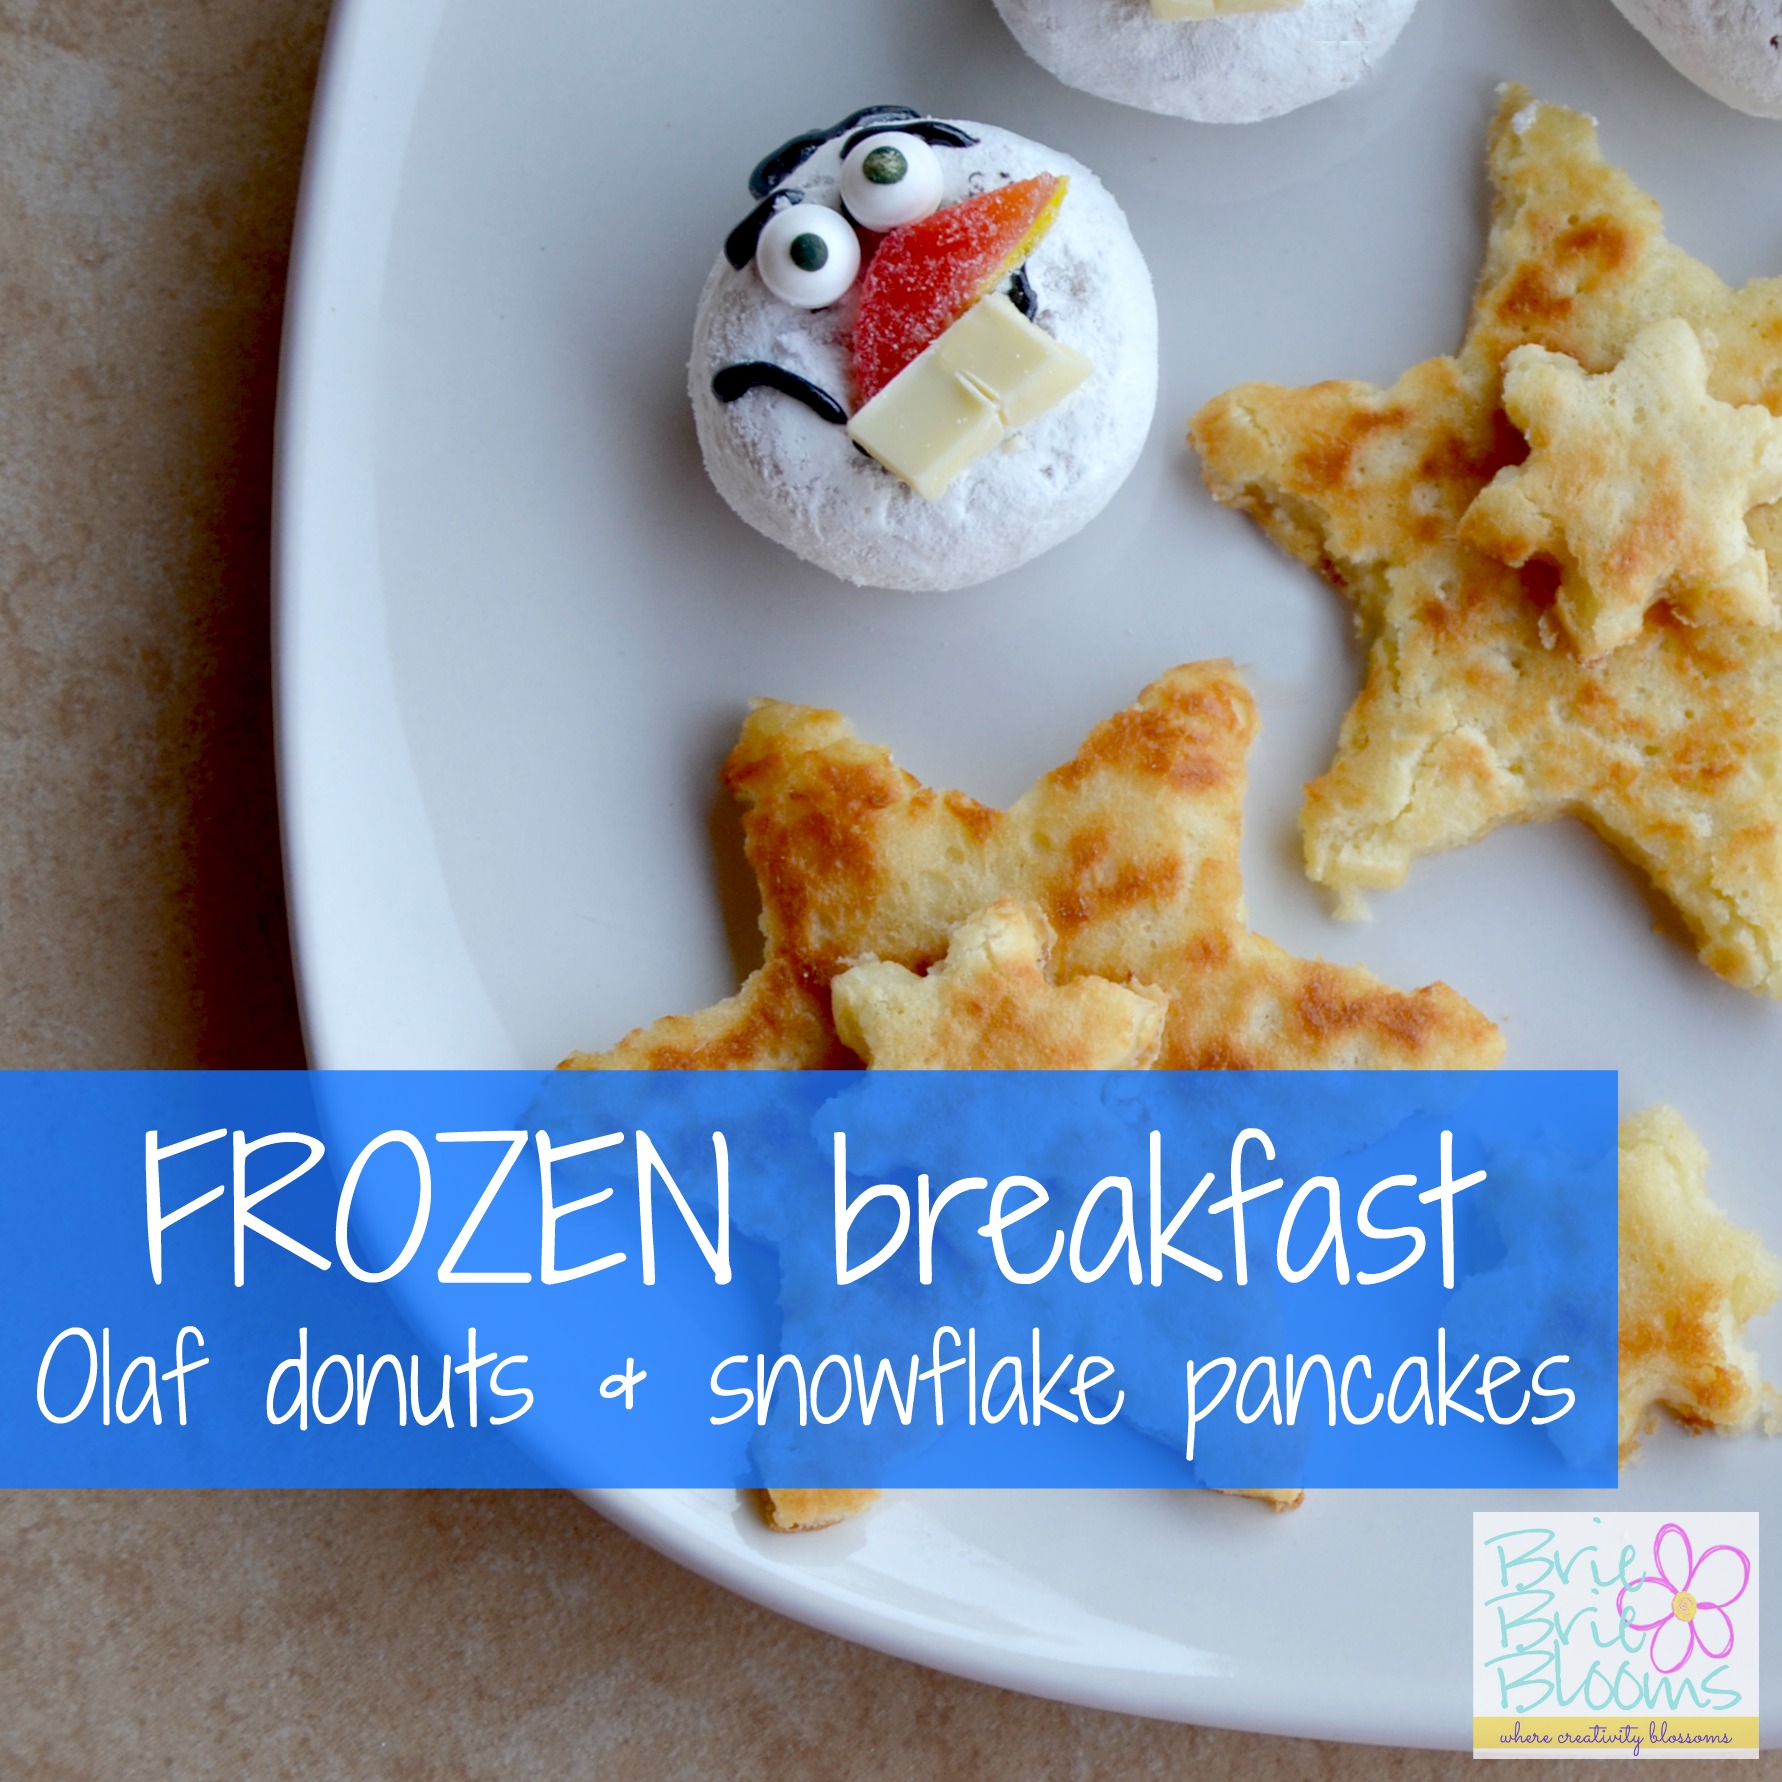 FROZEN breakfast - Olaf donuts and snowflake pancakes